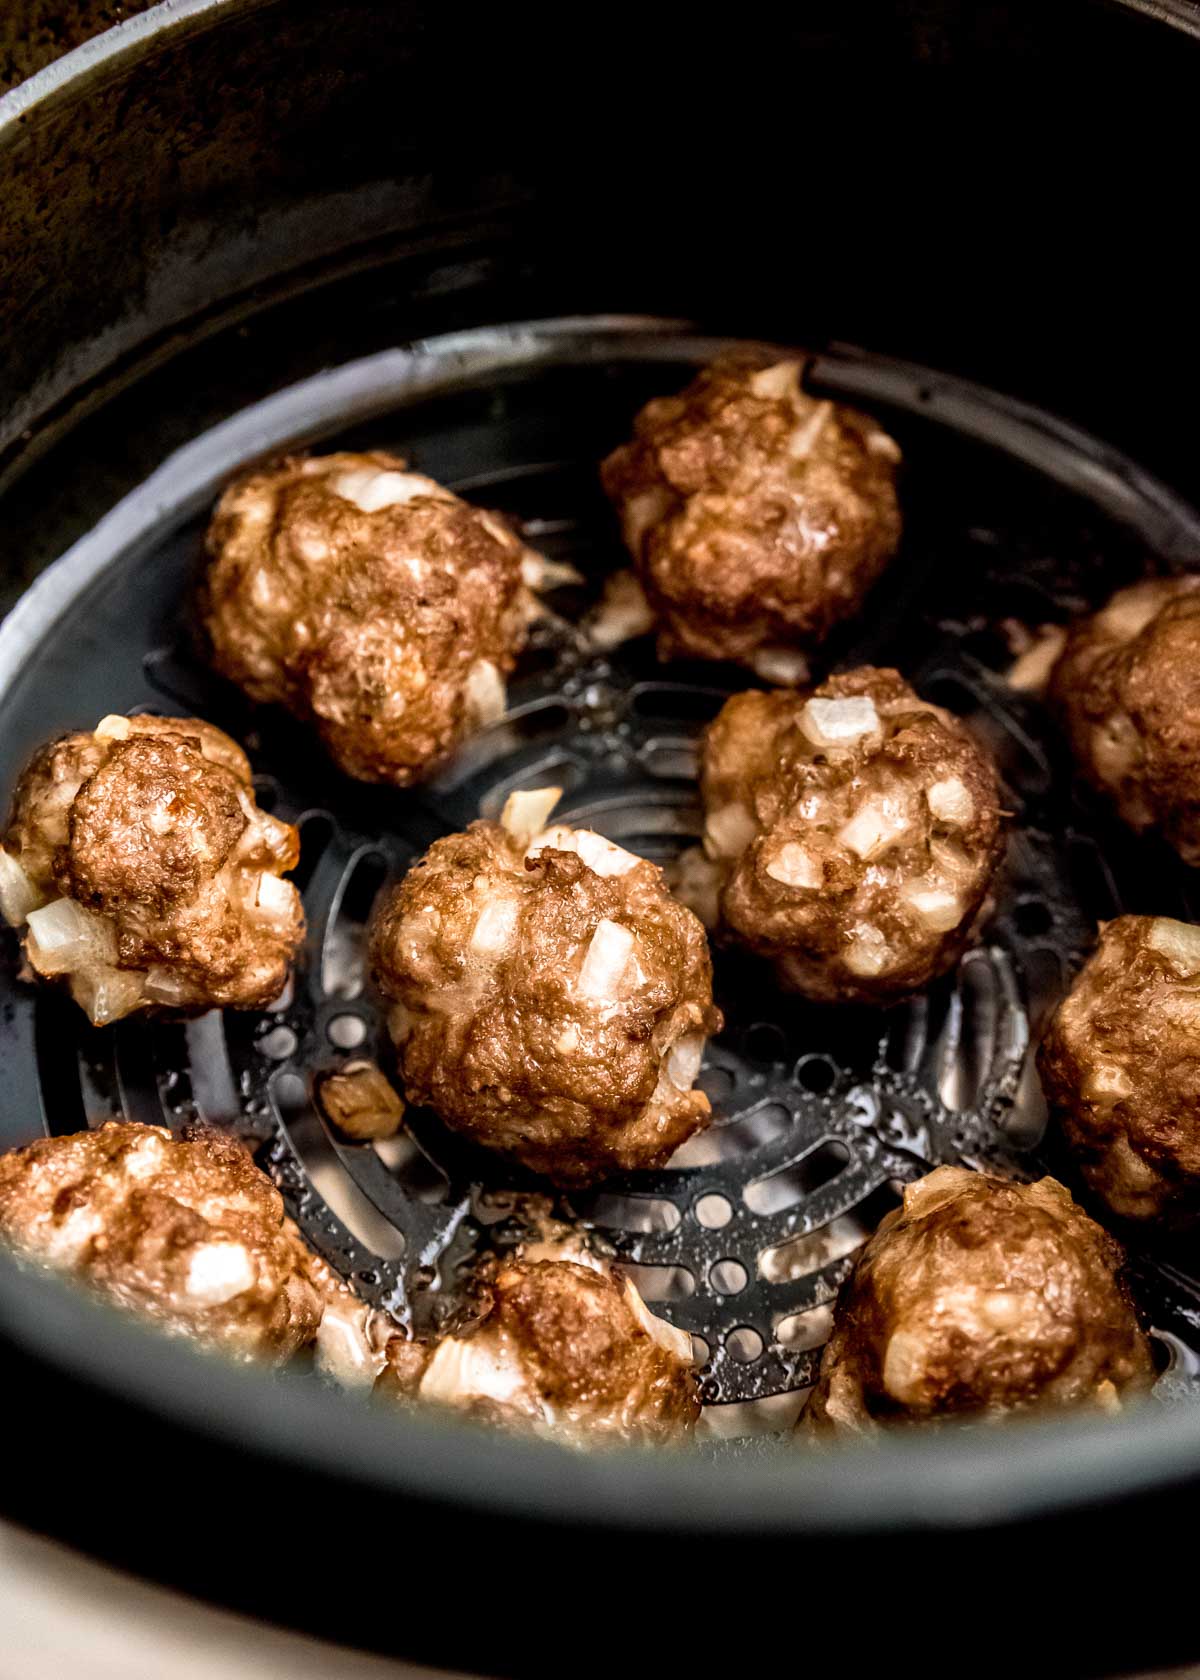 Cook for about 10 minutes for juicy air fryer classic meatballs